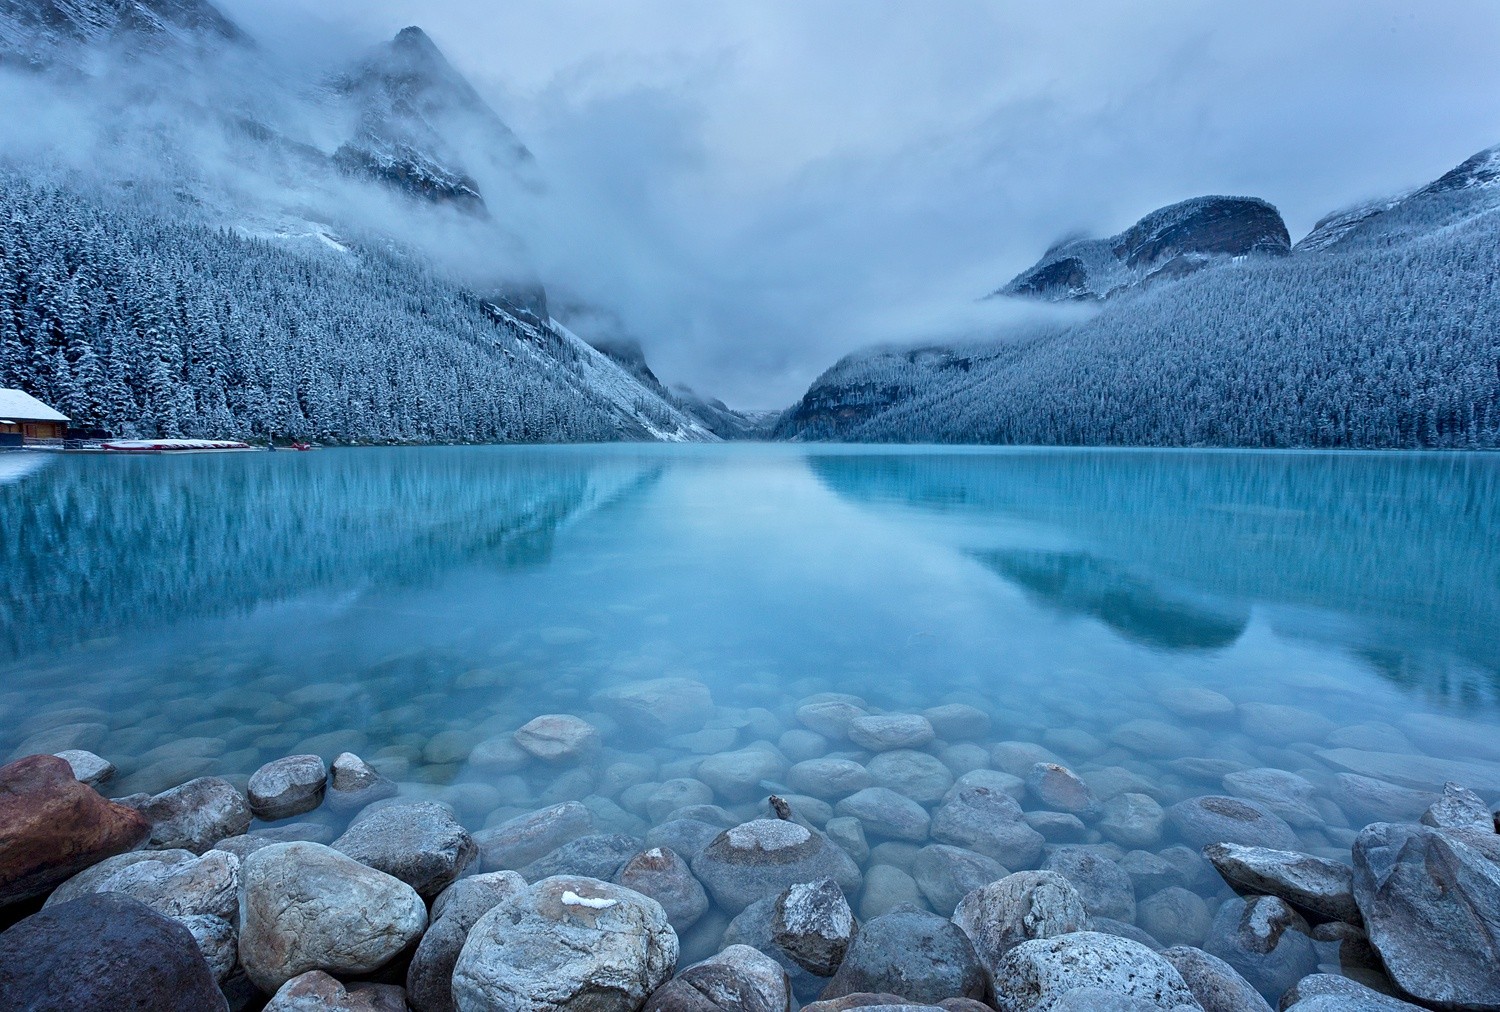 General 1500x1012 landscape nature lake mountains snow forest stones turquoise water winter mist